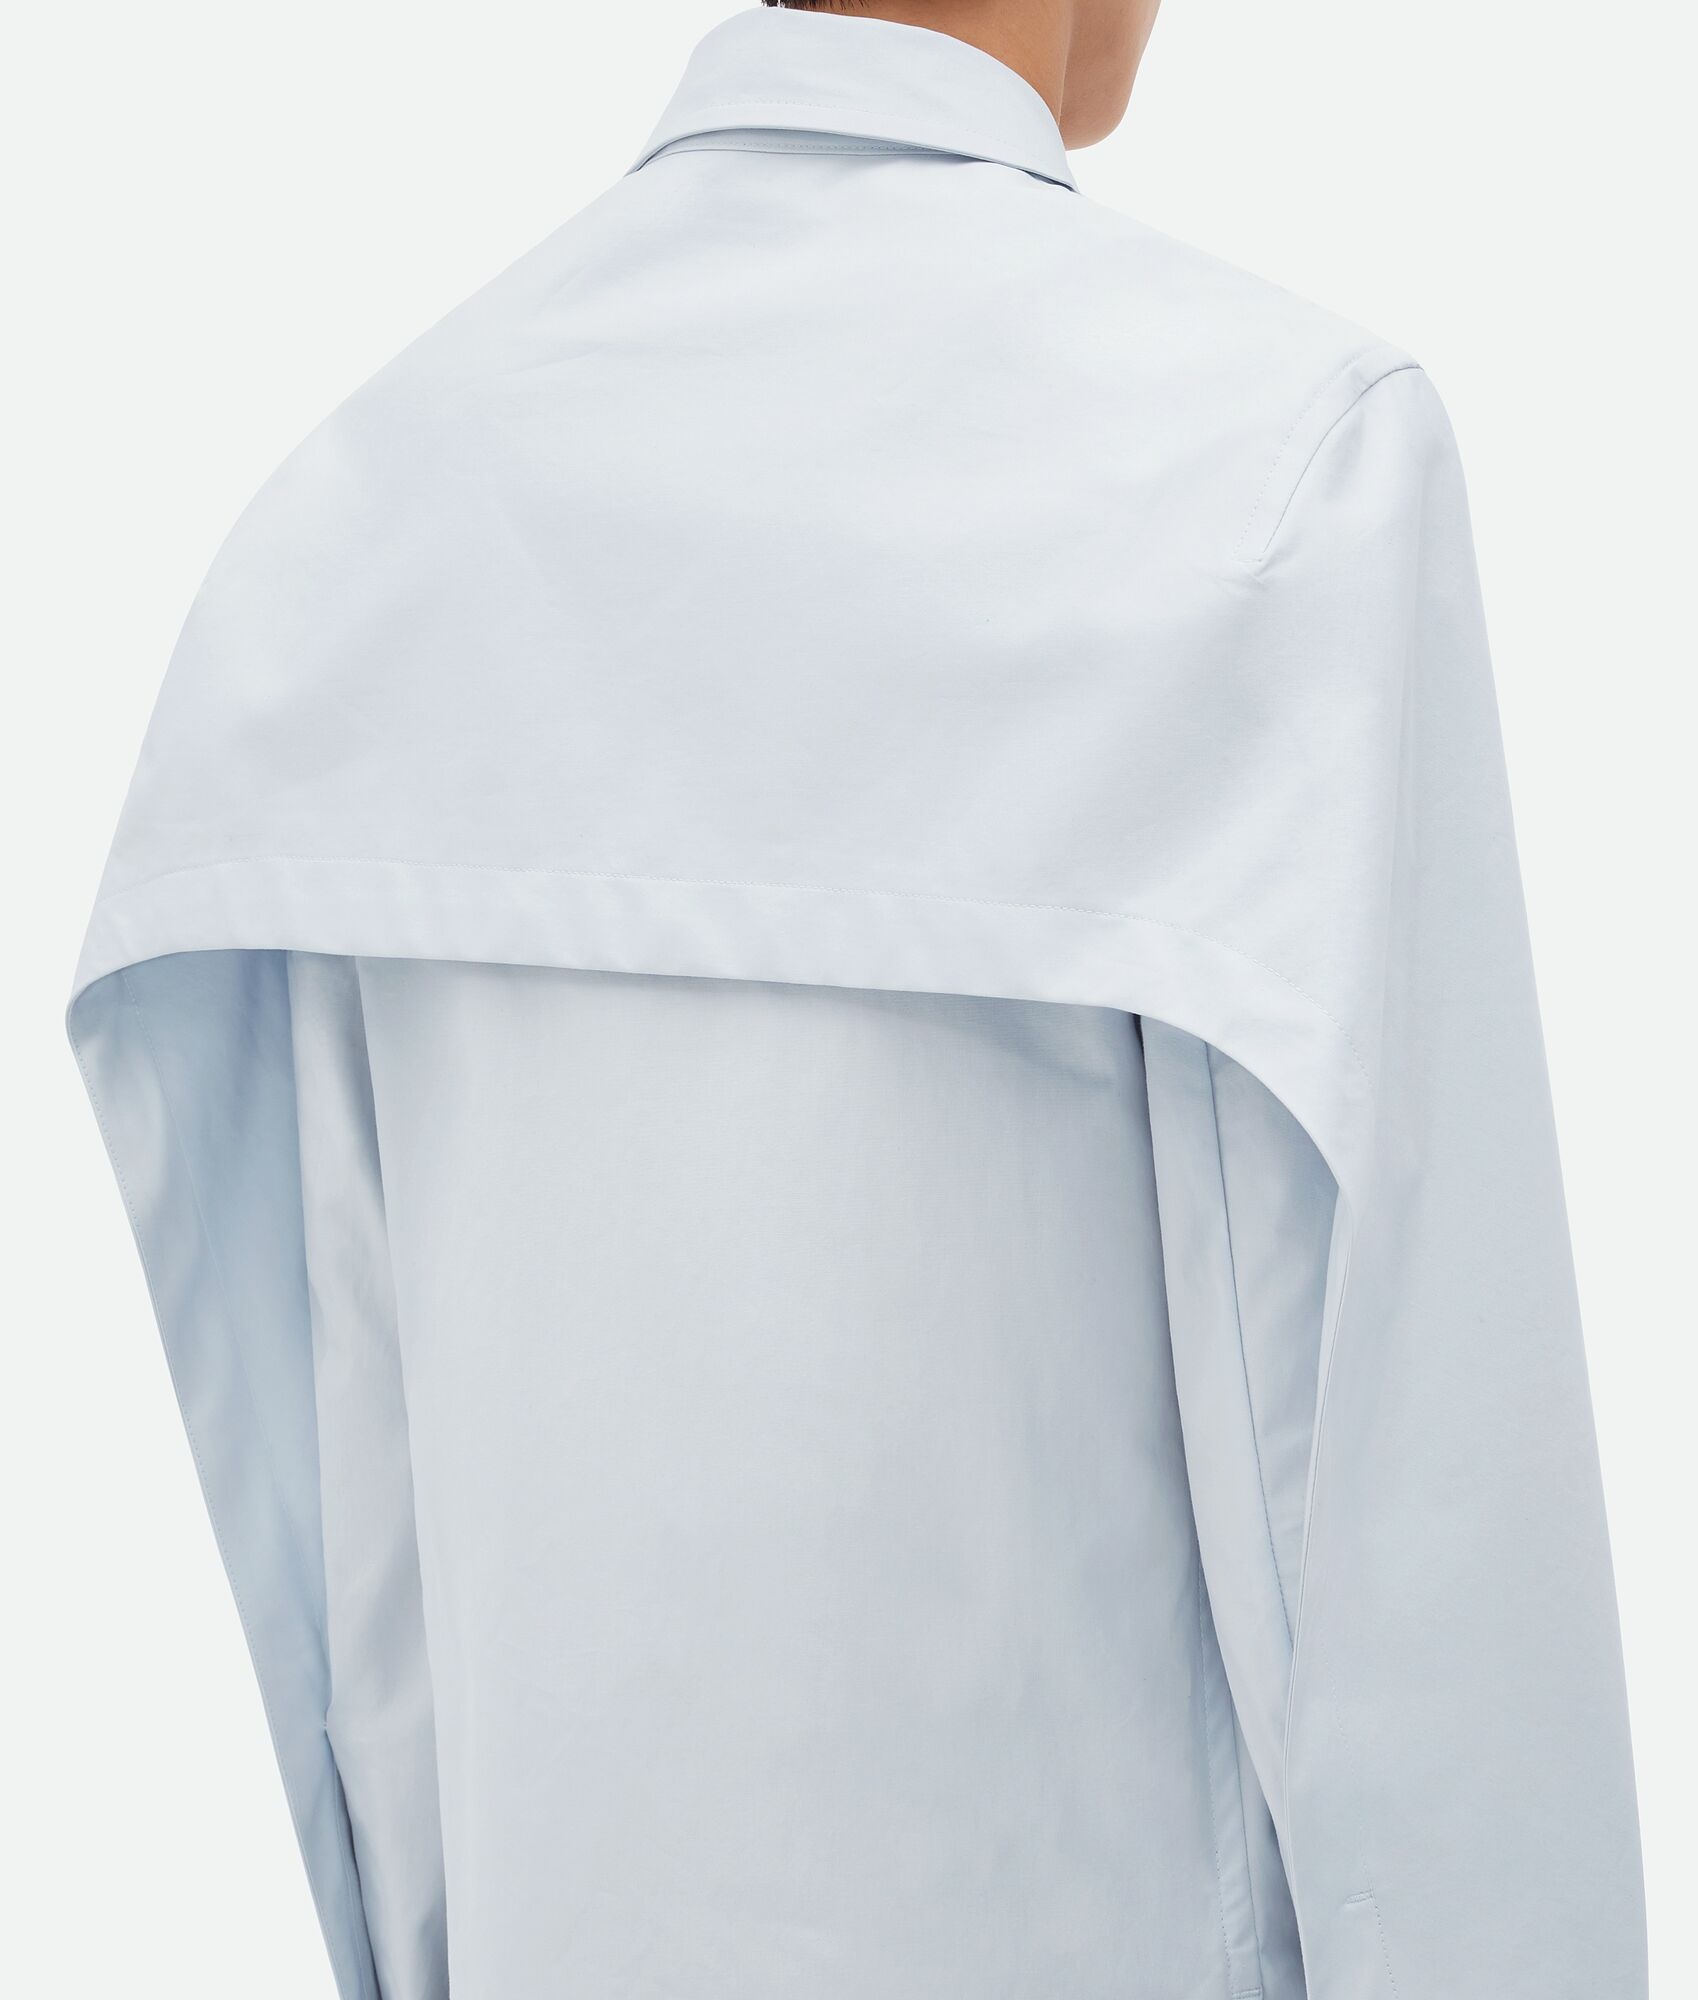 Cotton Shirt With Storm Flap - 4